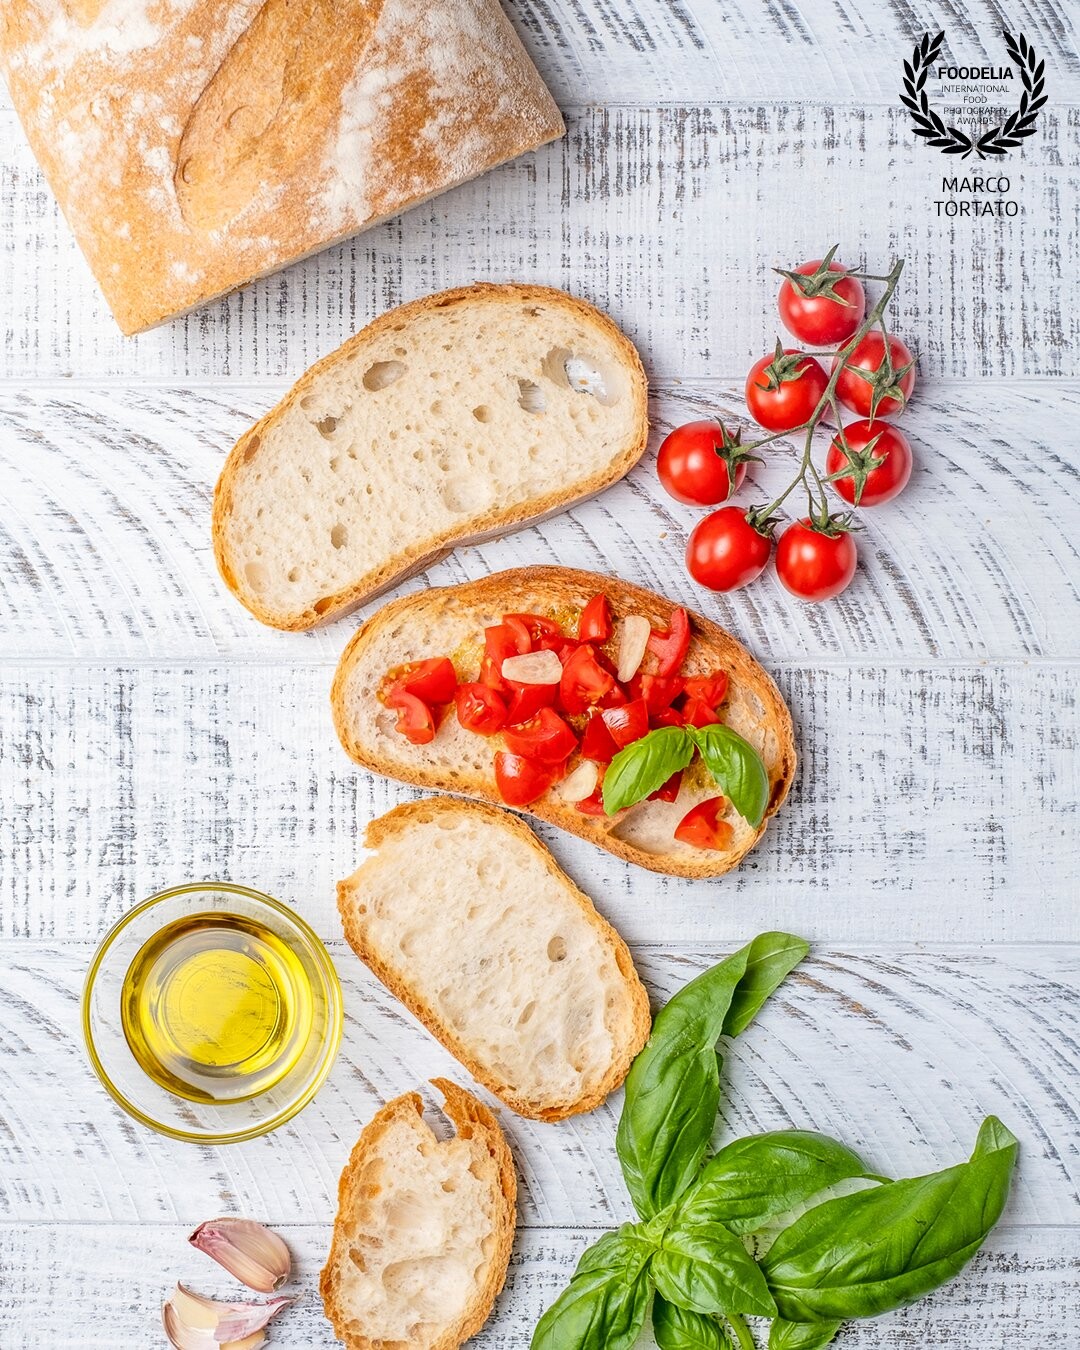 Italy and the Mediterranean colors and flavors in one shot. Basel, Extra Virgin Olive Oil, little tomatoes, garlic and bread. <br />
Bruschetta! <br />
<br />
www.marcotortato.it